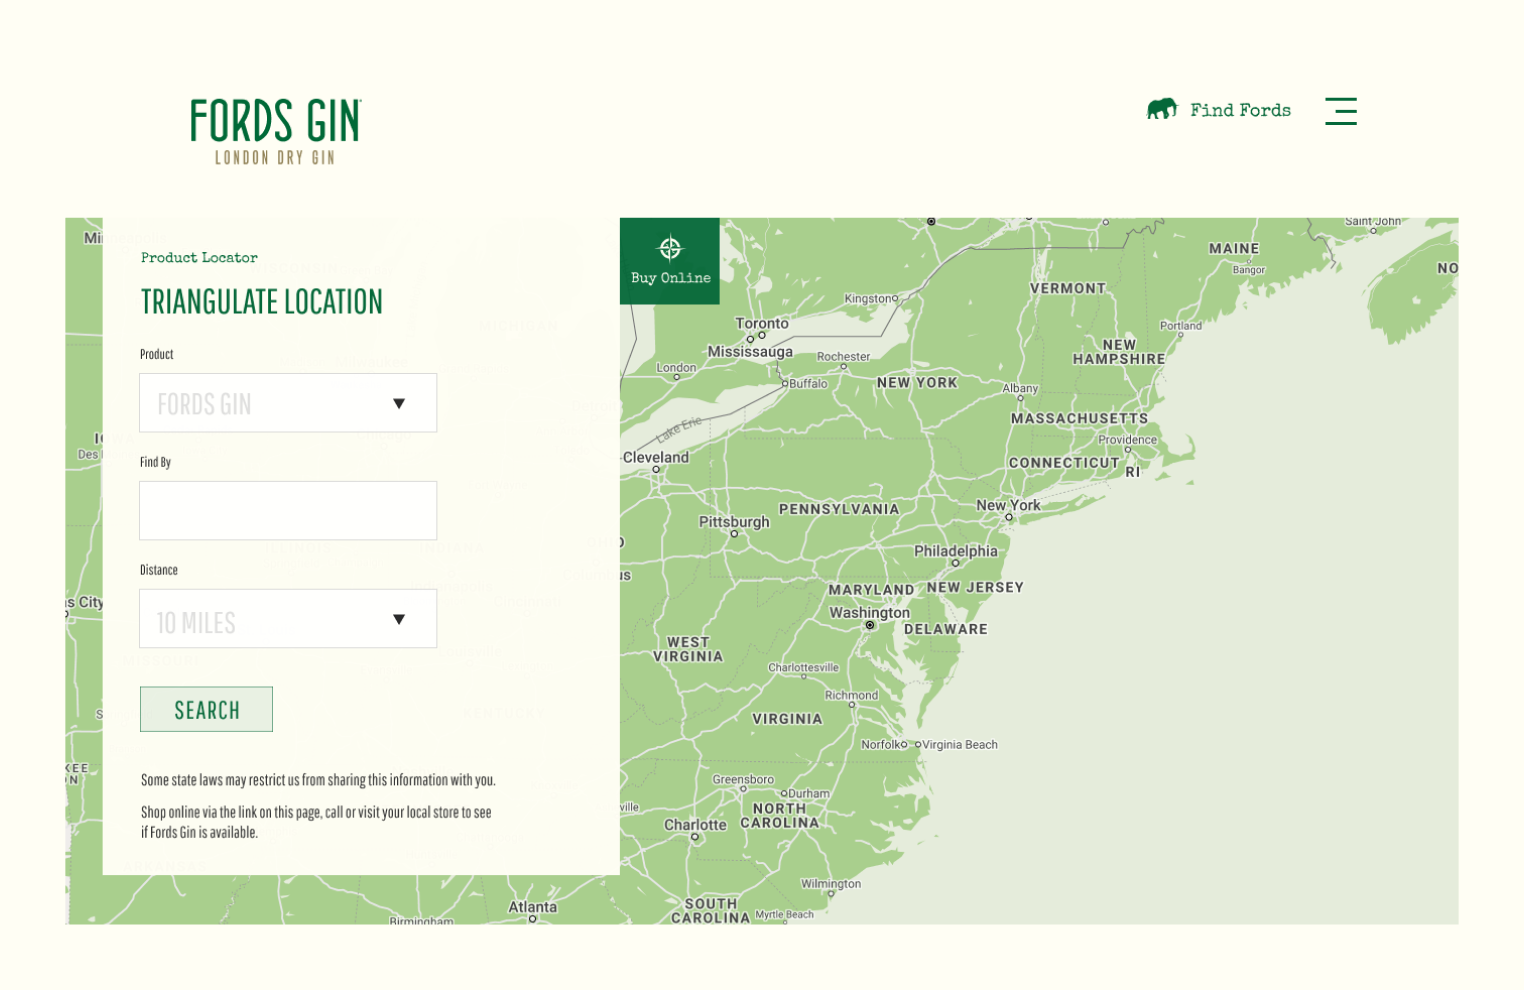 Fords Gin web design featuring a product locator tool that allows you to search for Fords Gin in a store near you.